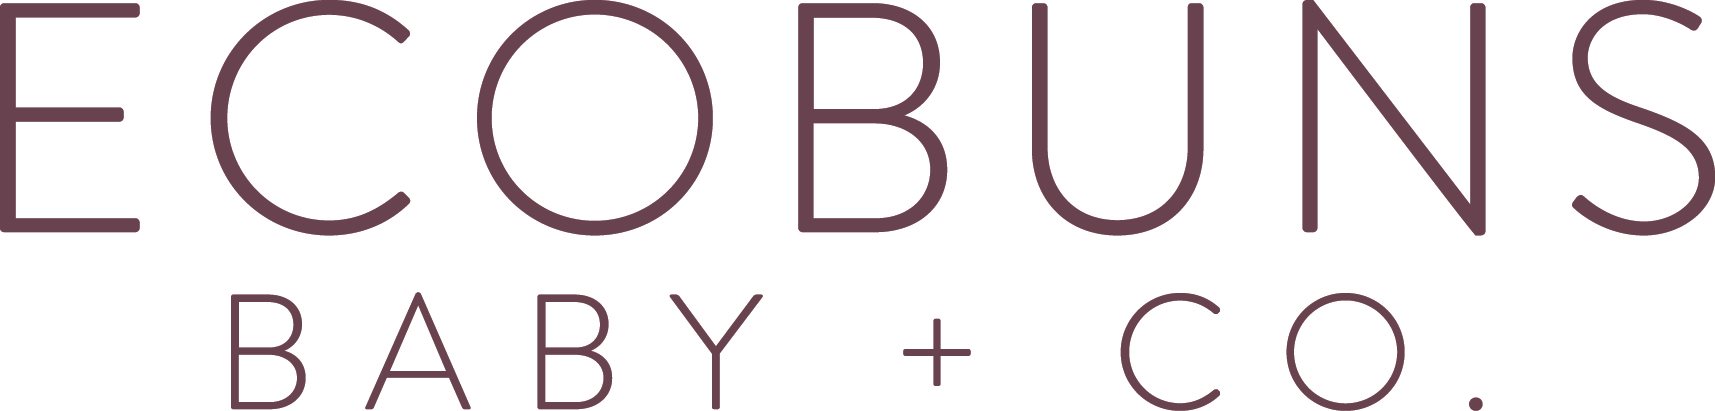 In Partnership with ecobuns.com